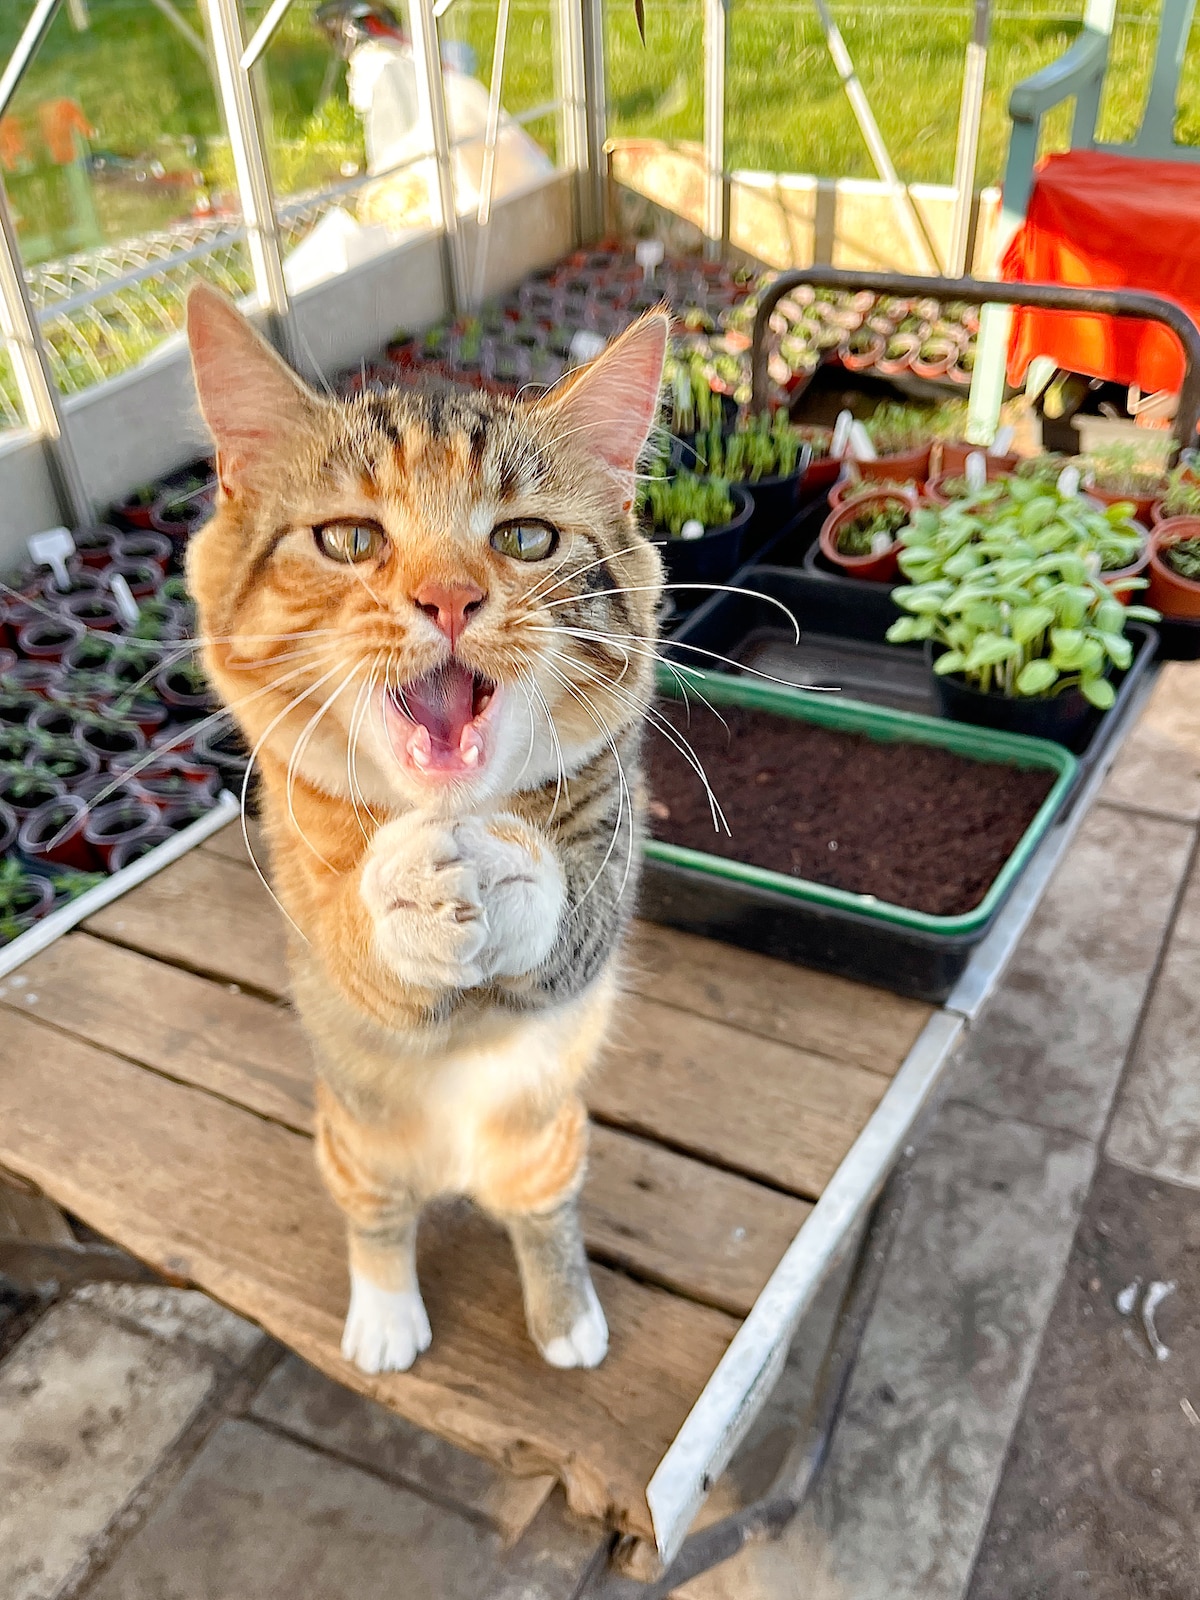 Cat Meowing Out in the Garden